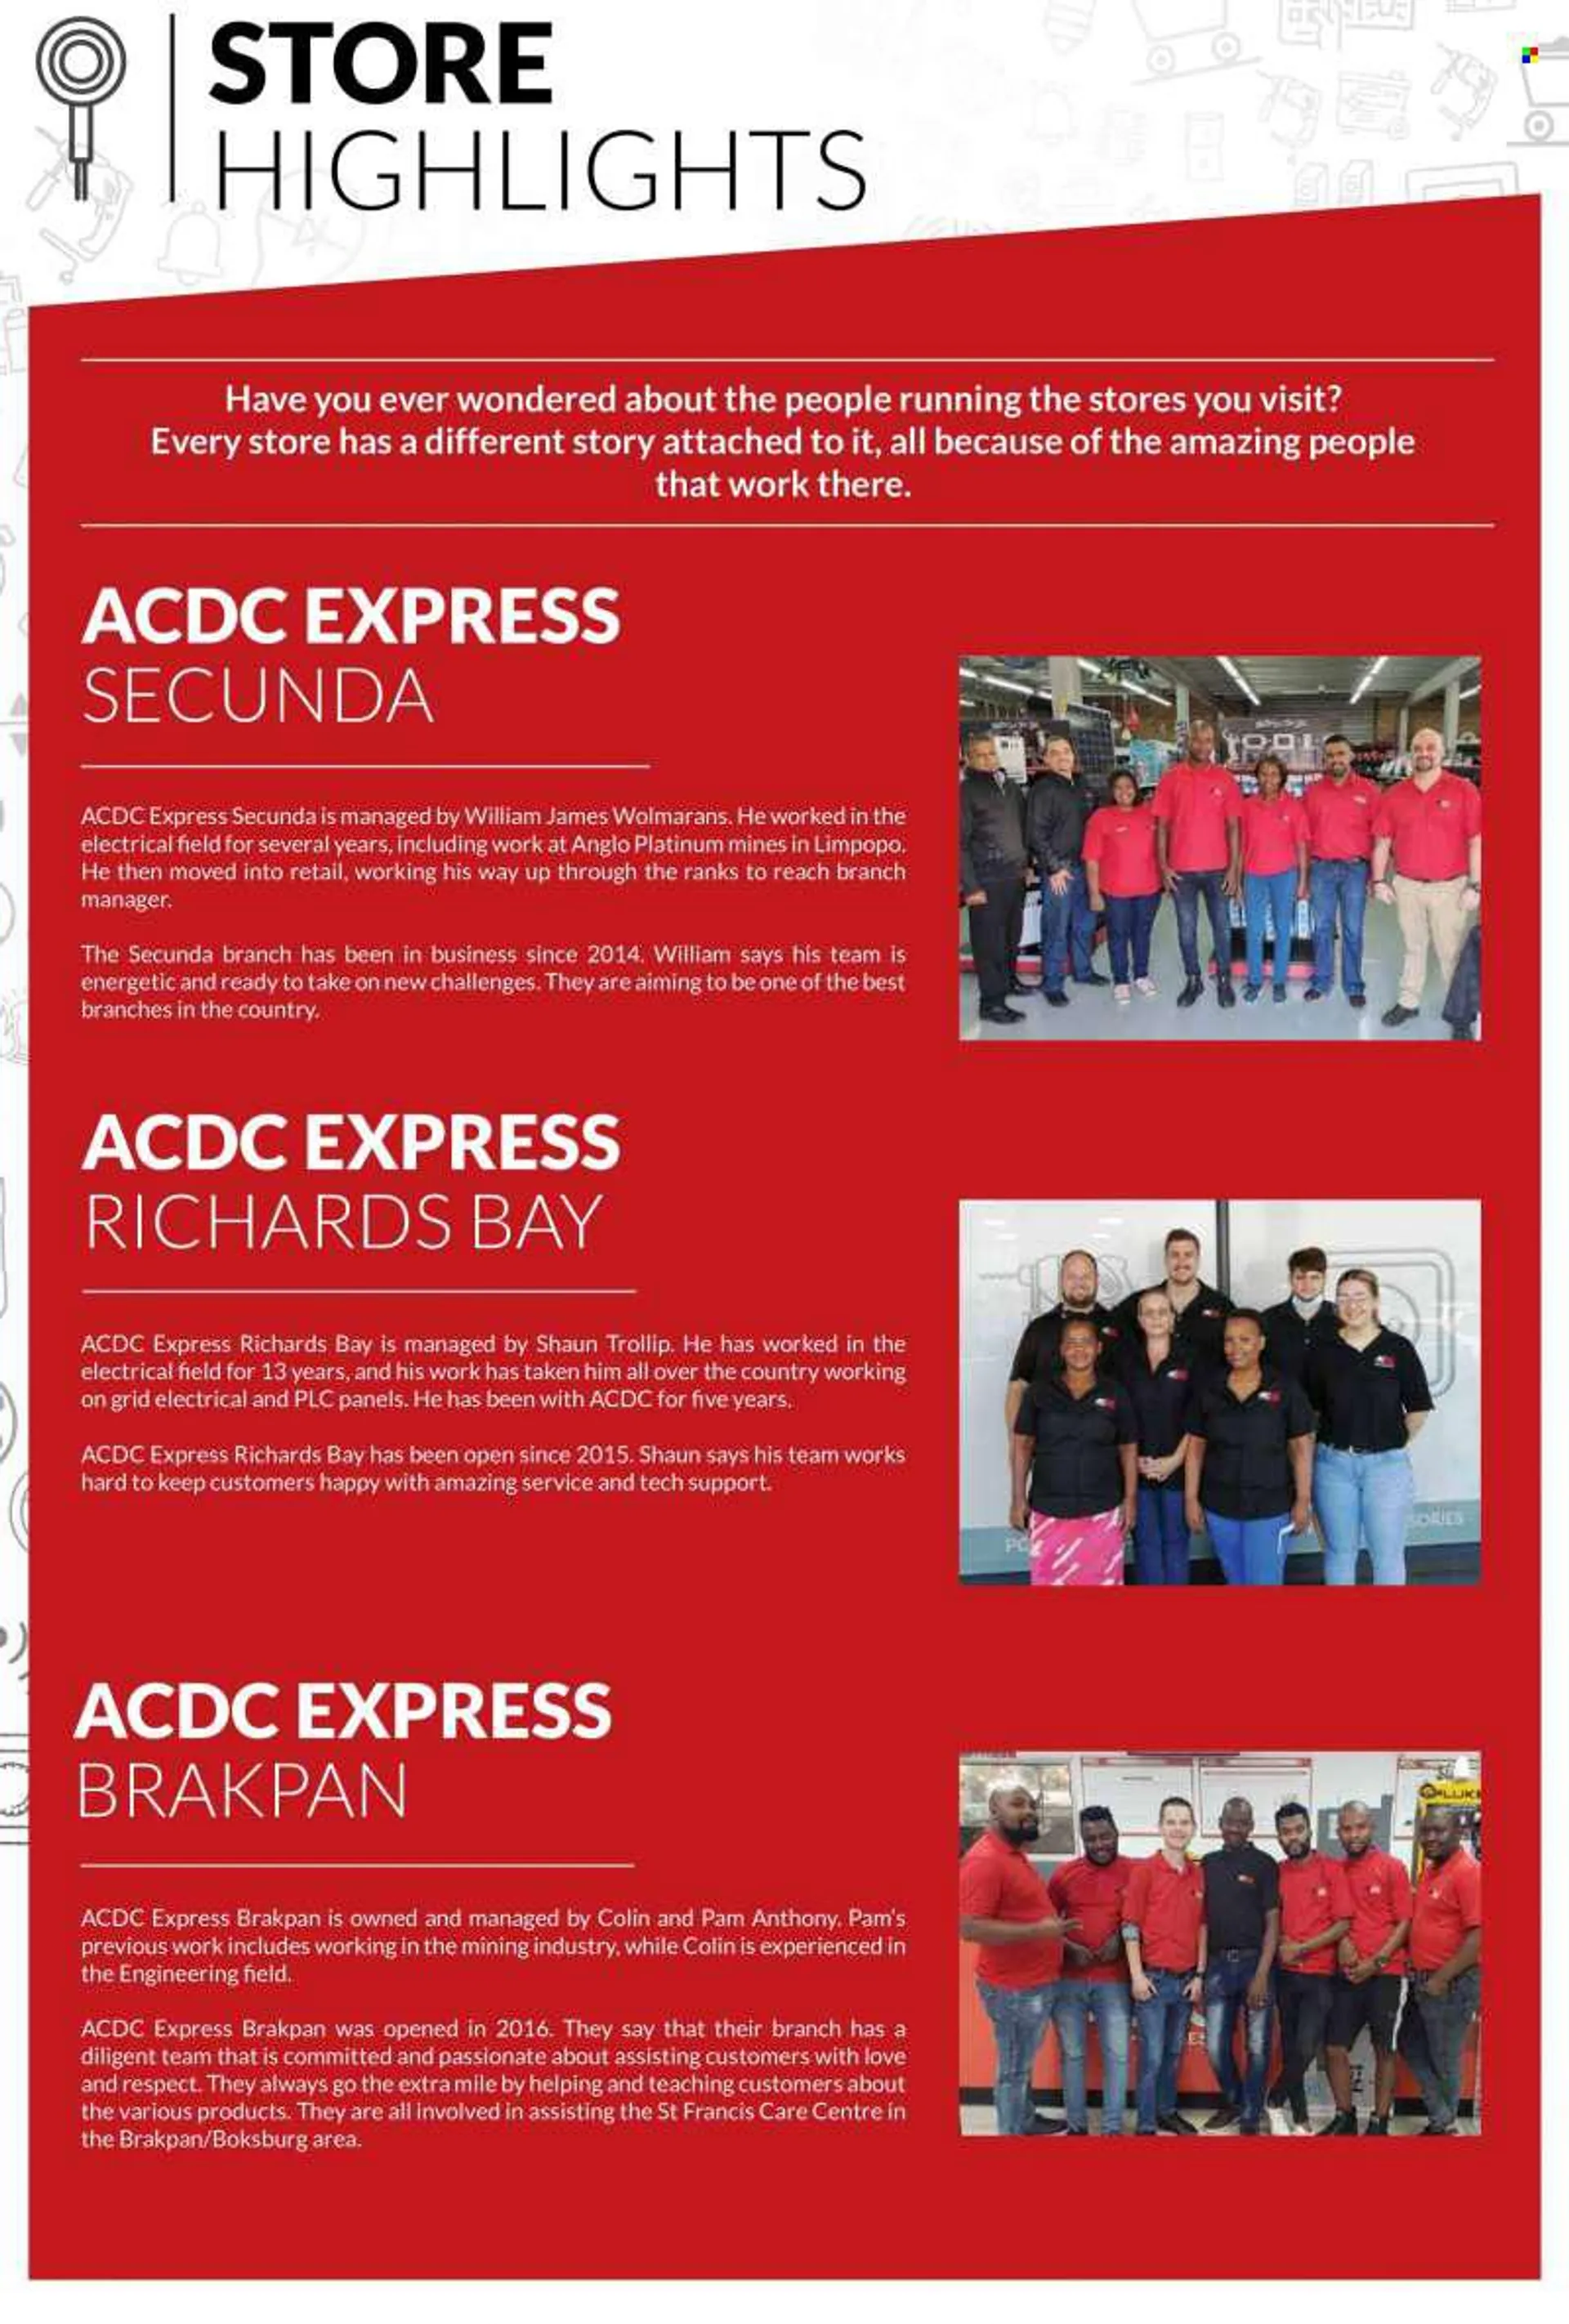 ACDC Express catalogue  - 01/04/2022 - 30/06/2022. - 1 April 30 June 2022 - Page 3